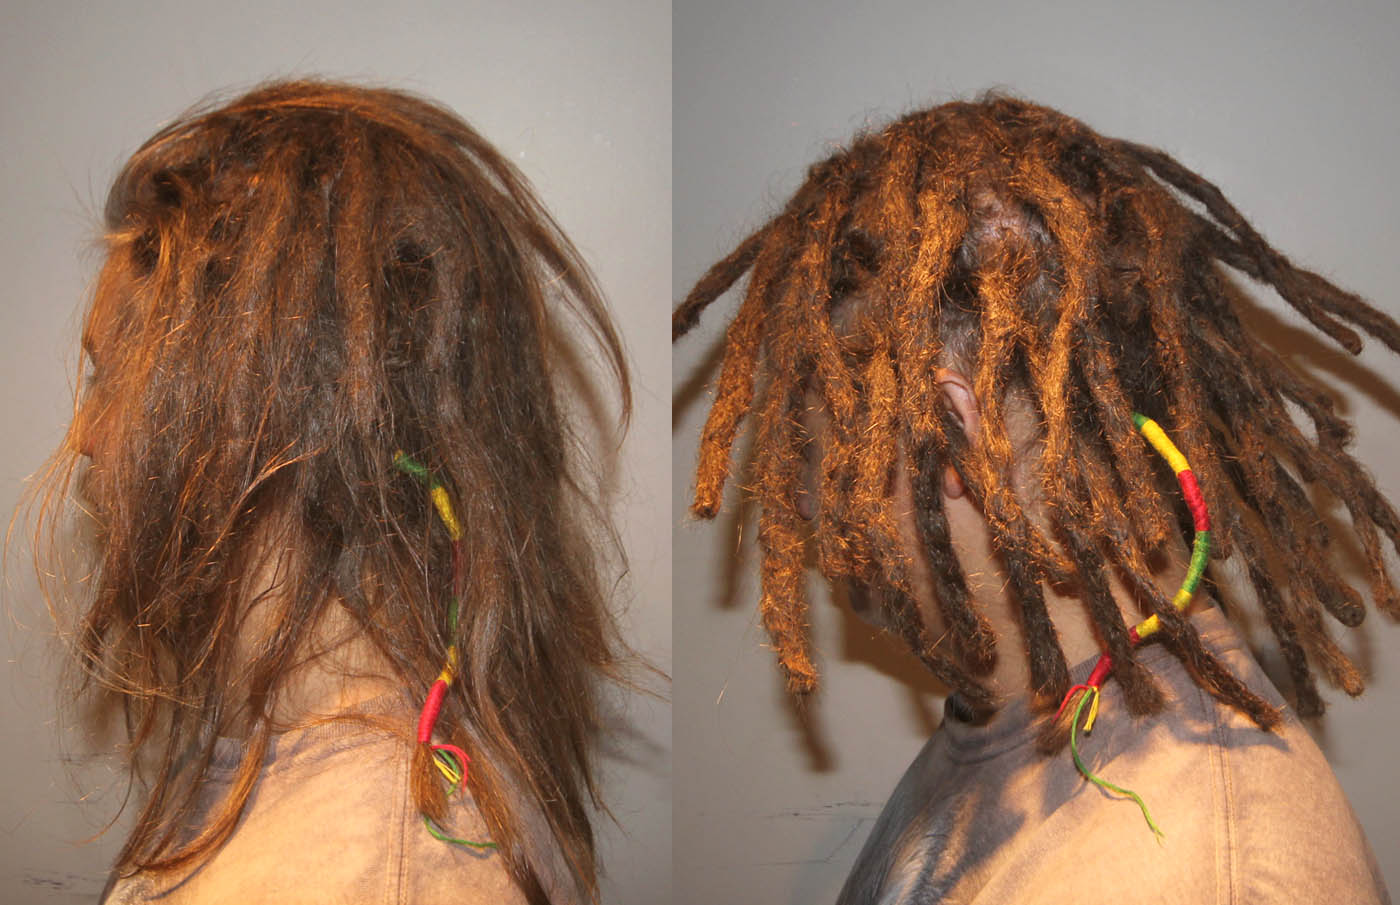 Etienne with dreadlocks, before and after fixed by Dreads MTL